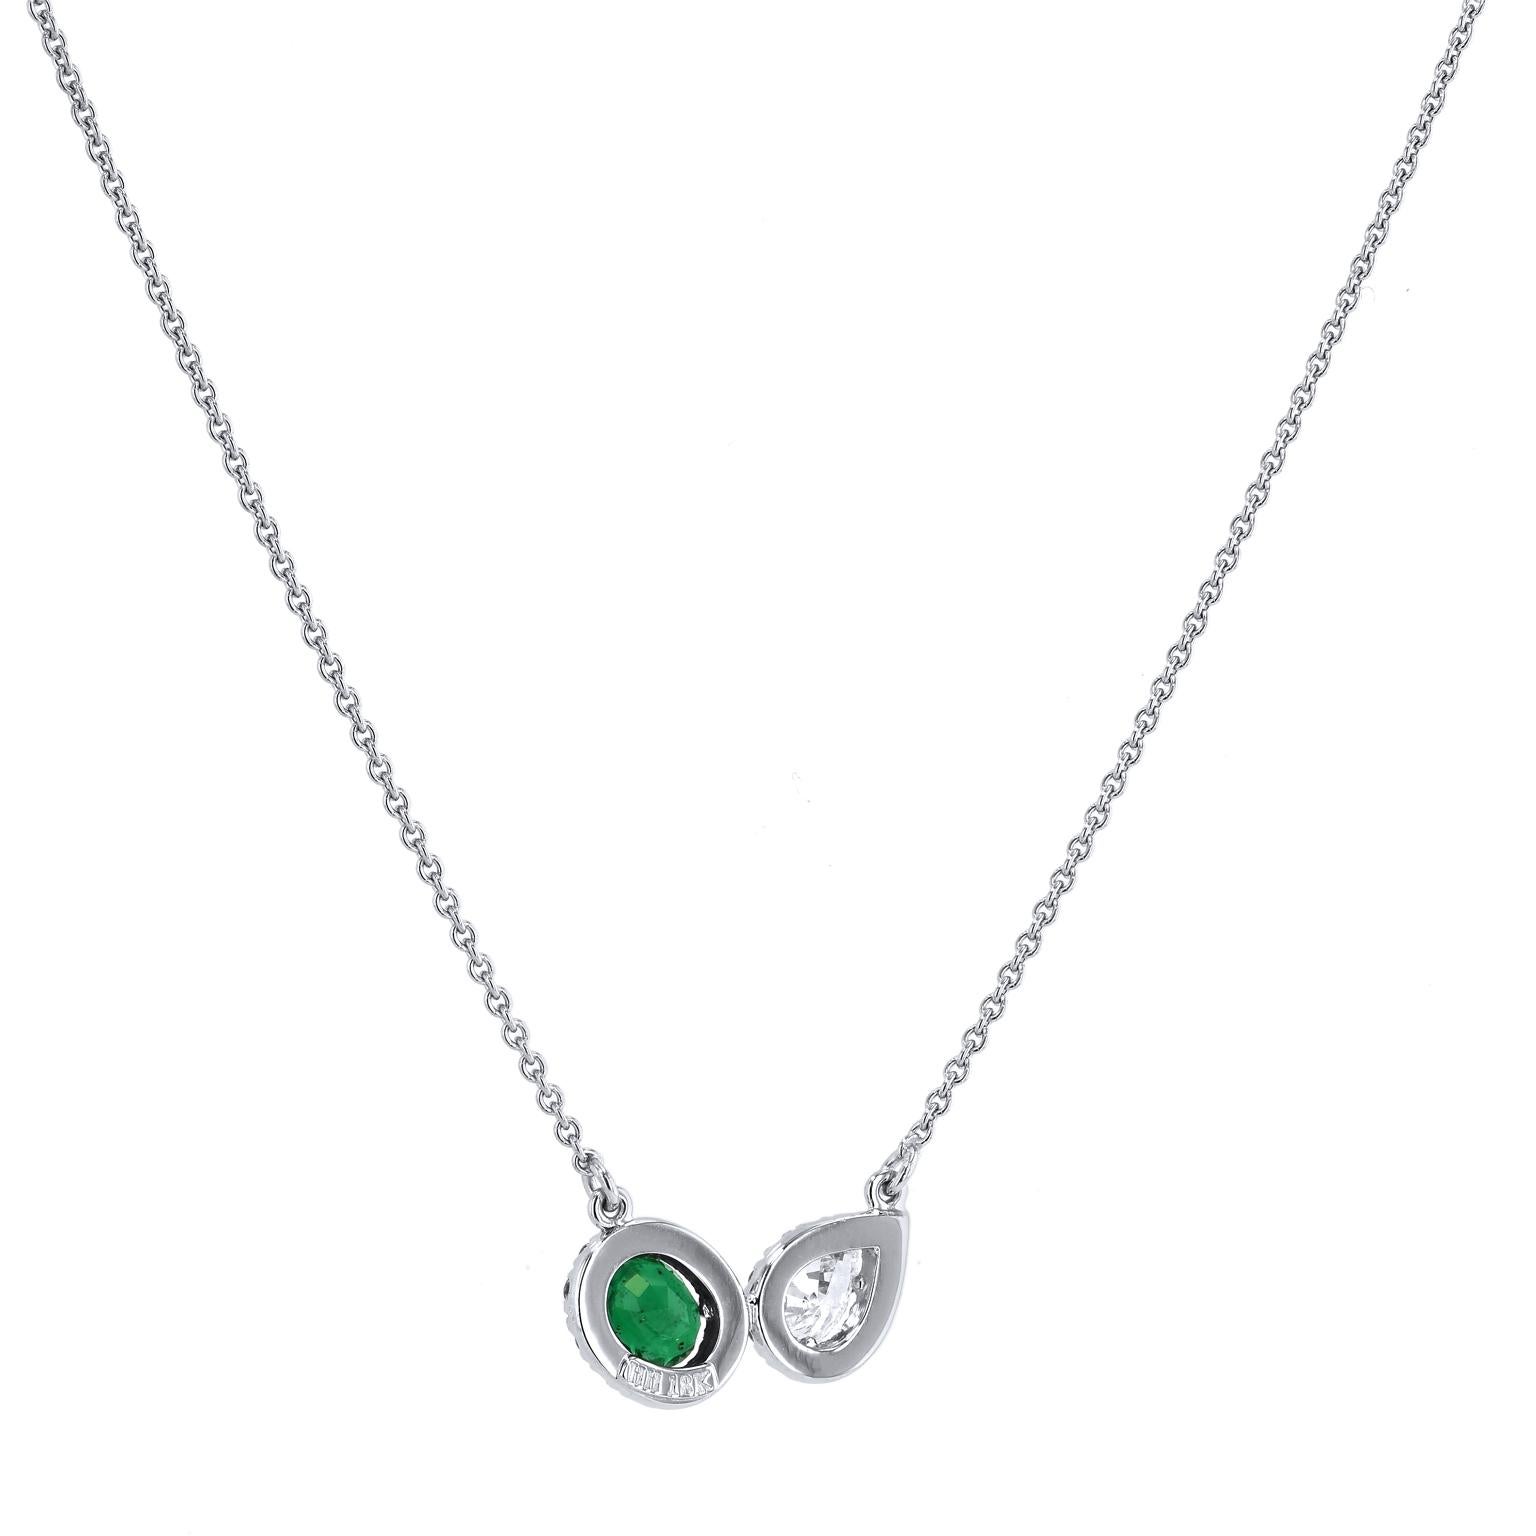 Oval Cut Diamond and Emerald A-Symmetrical Pendant Necklace Set in 18 Karat White Gold 